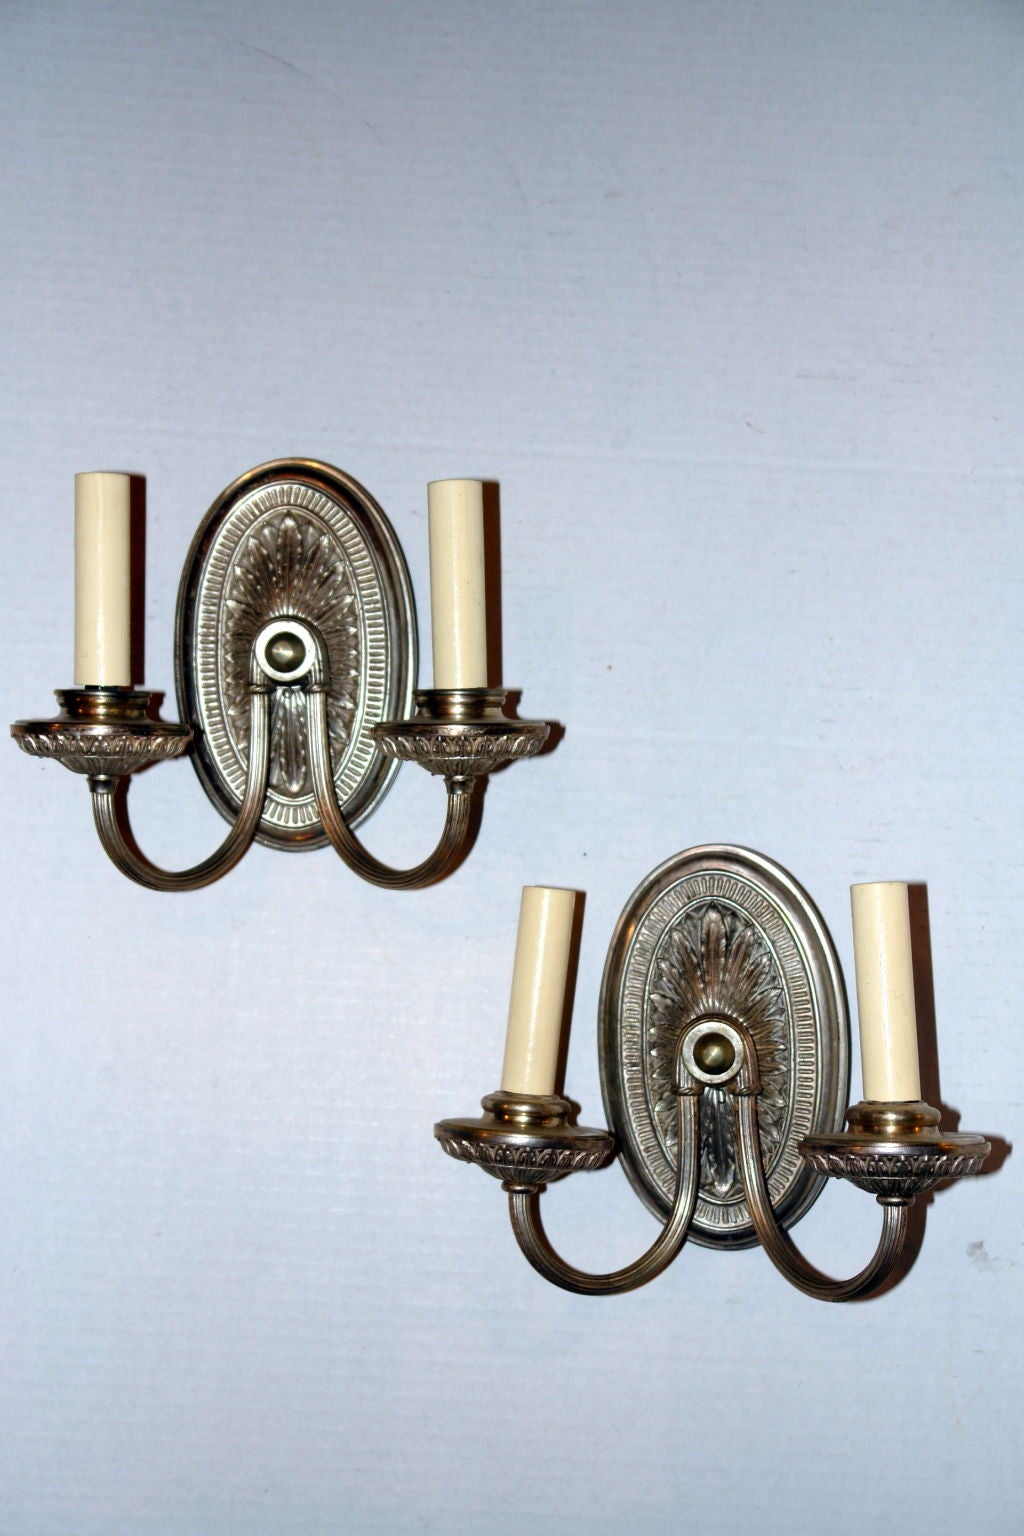 Pair of circa 1920's English silver plated two-arm sconces with original finish.

Measurements:
Height: 8